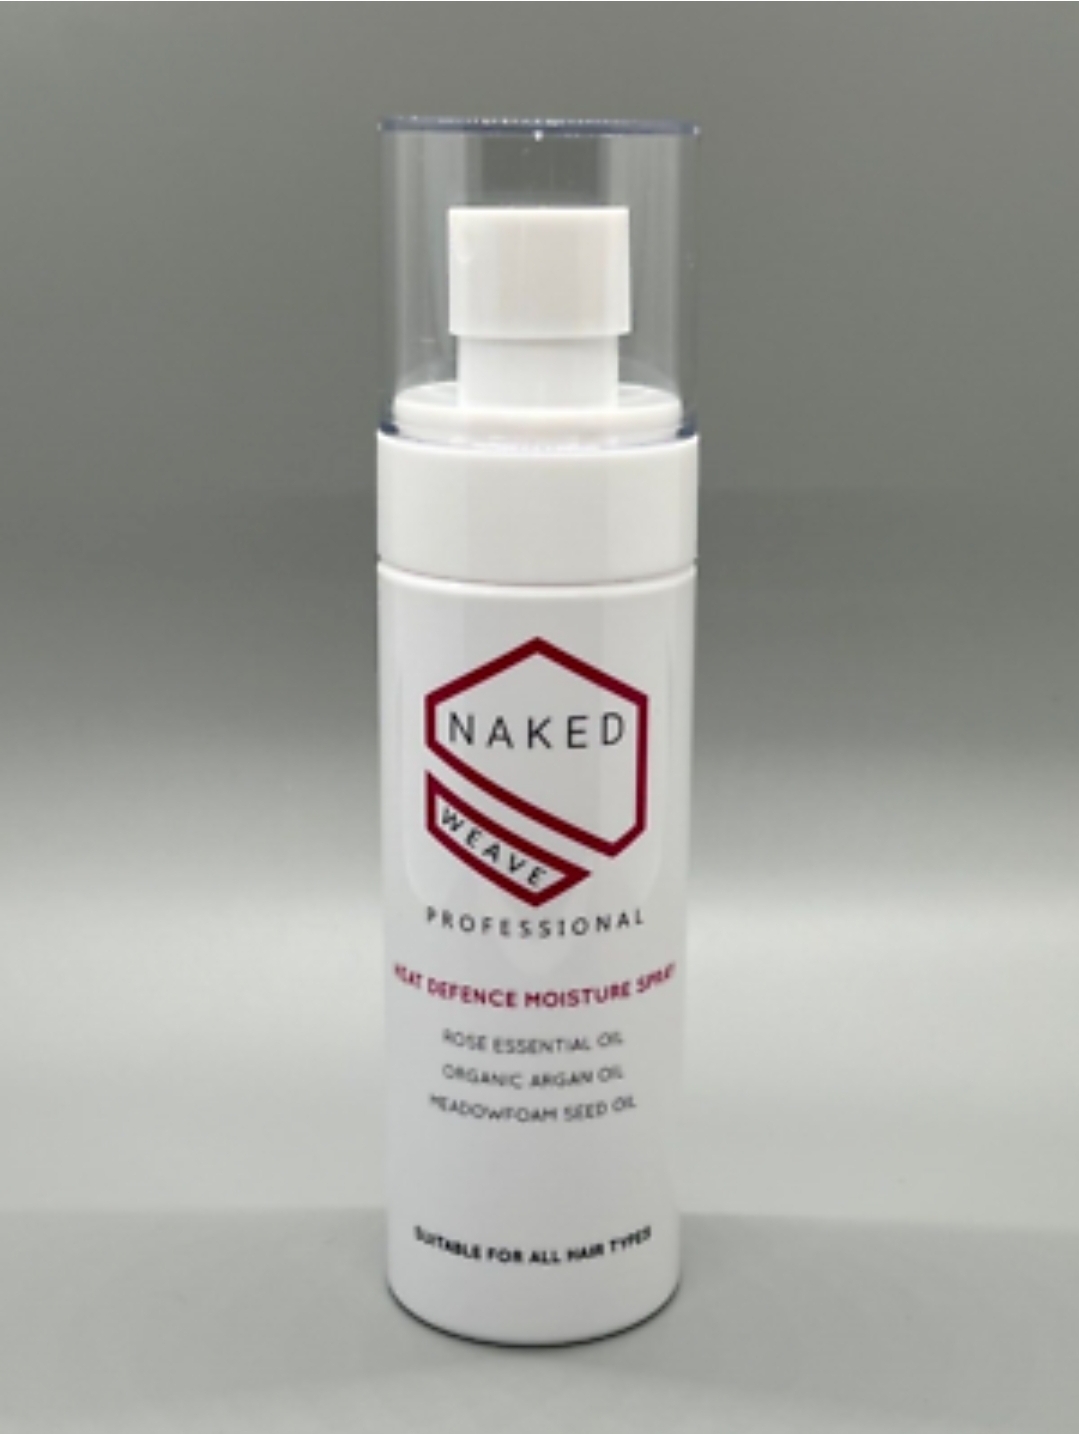 NAKED WEAVE; Professional Heat Defence Moisture Spray